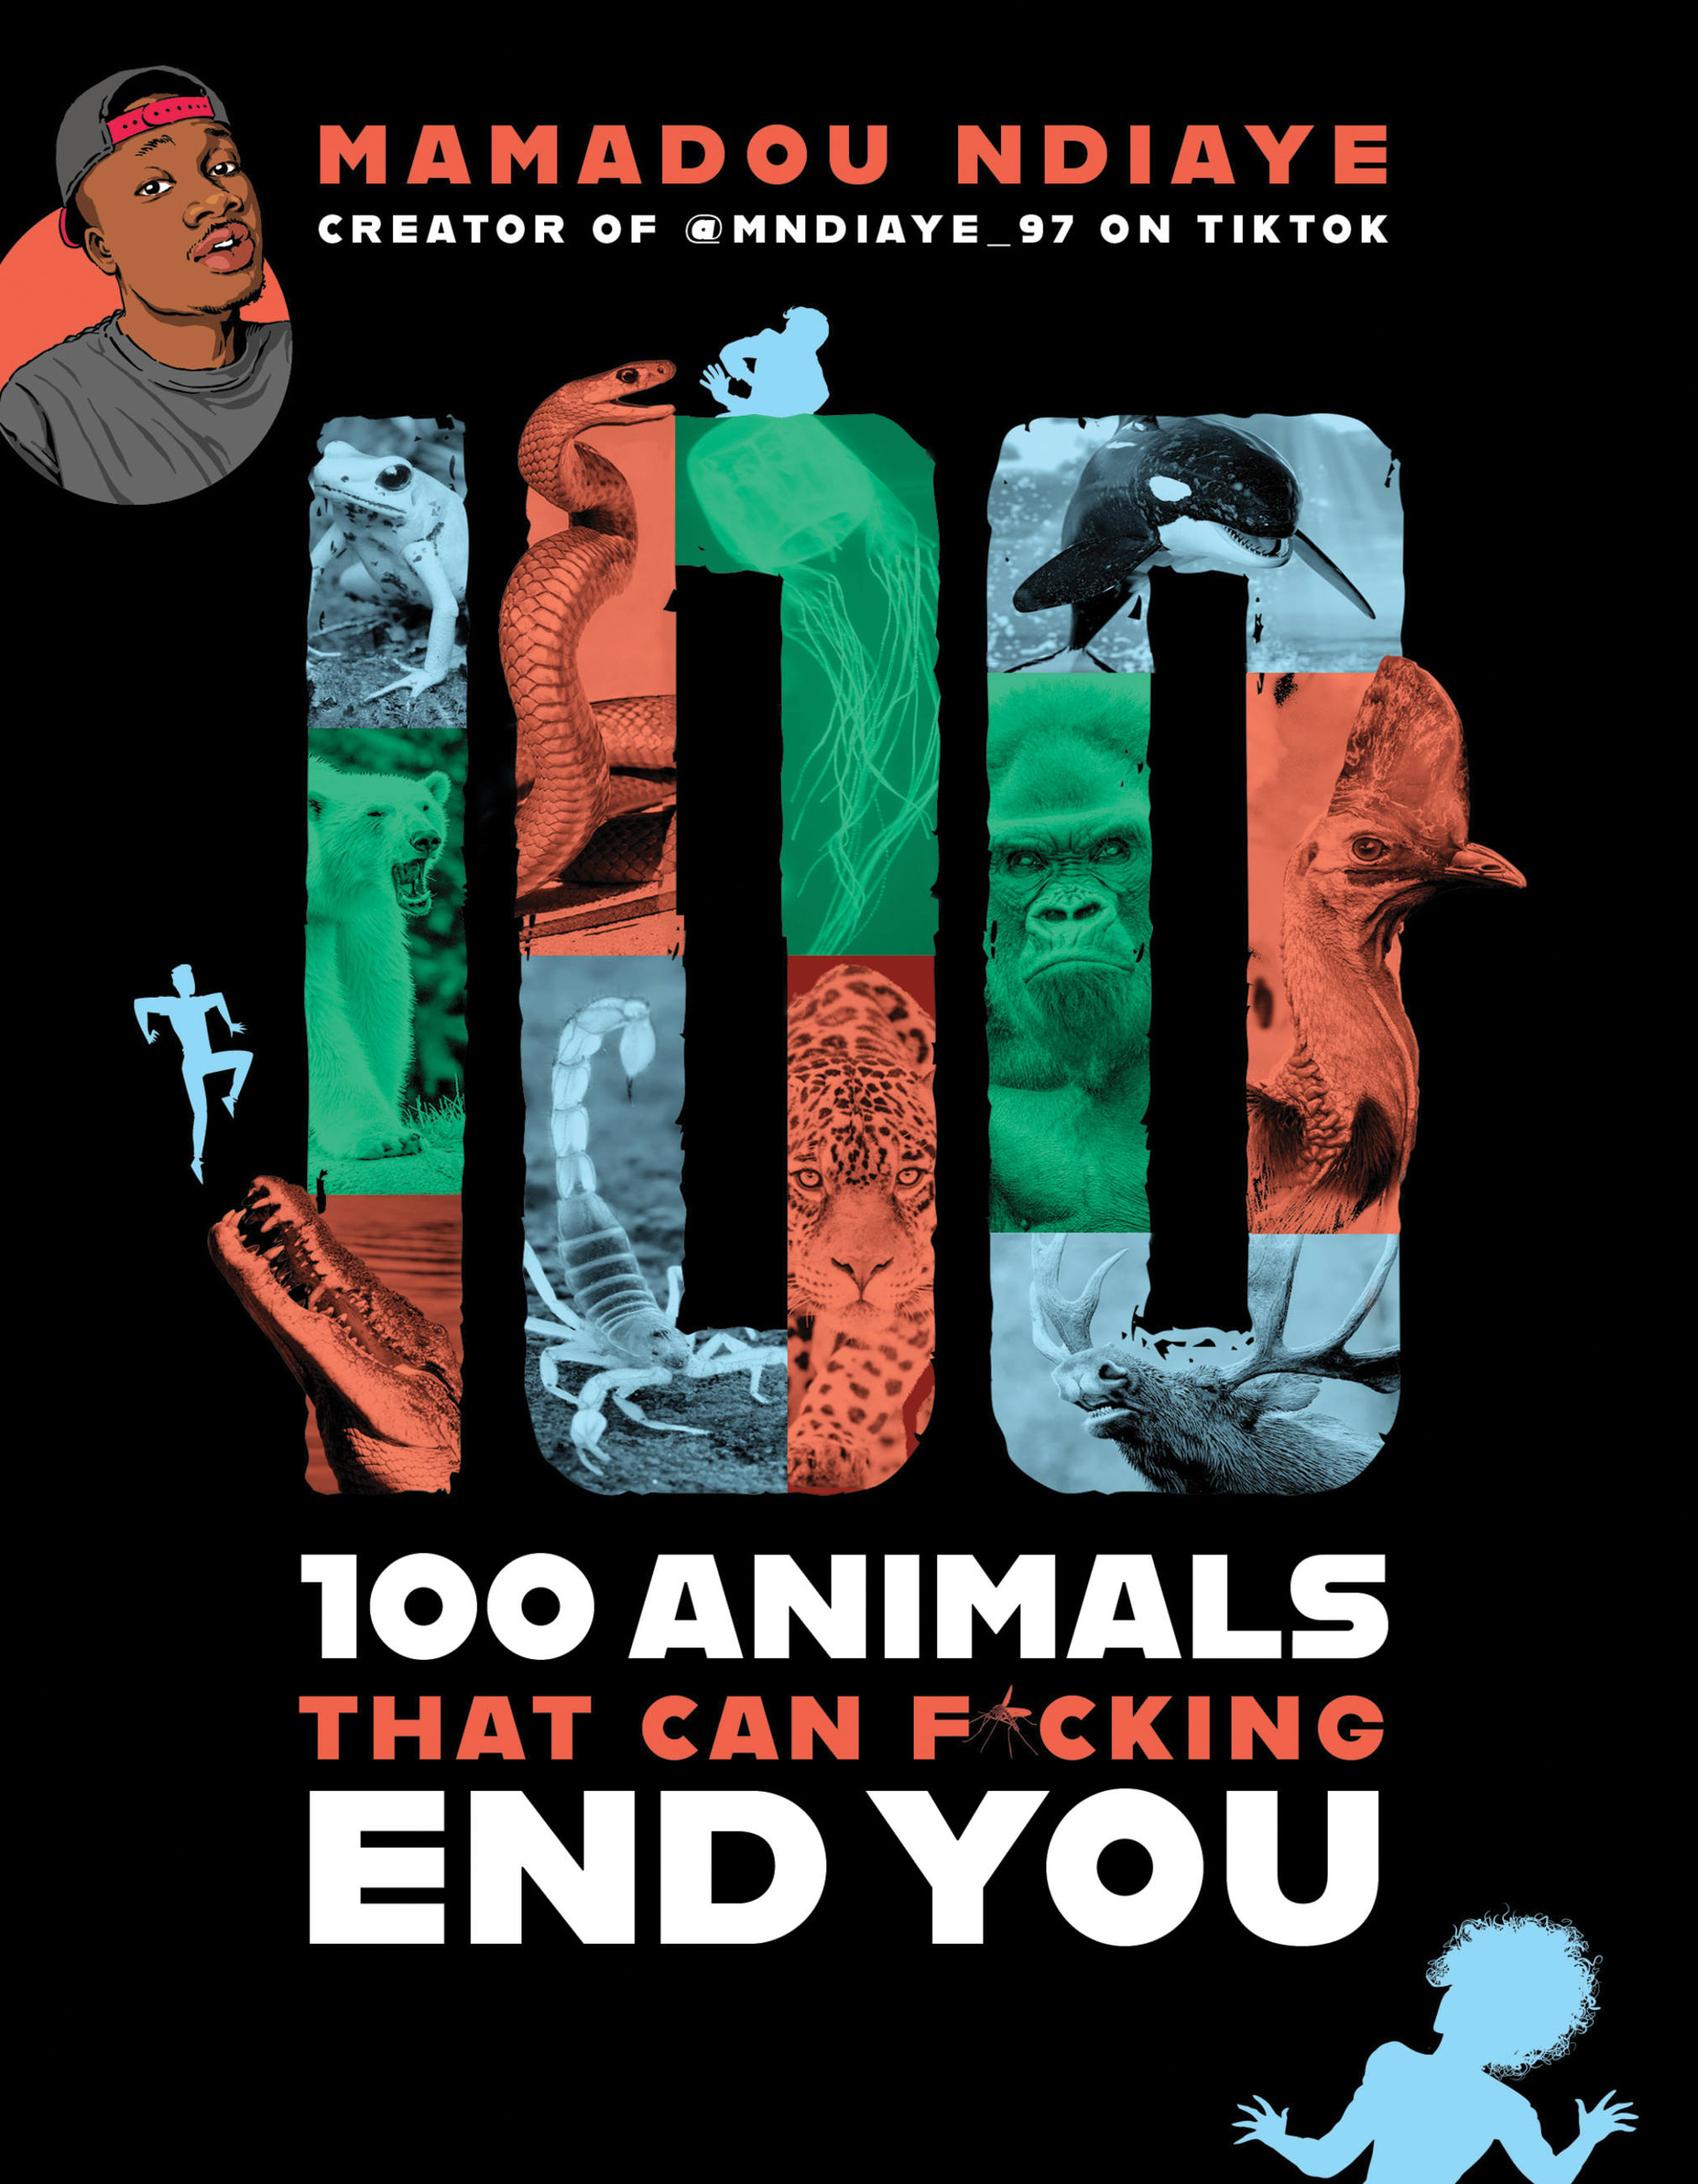 100 Animals That Can F*cking End You by Mamadou Ndiaye | Hachette Book Group